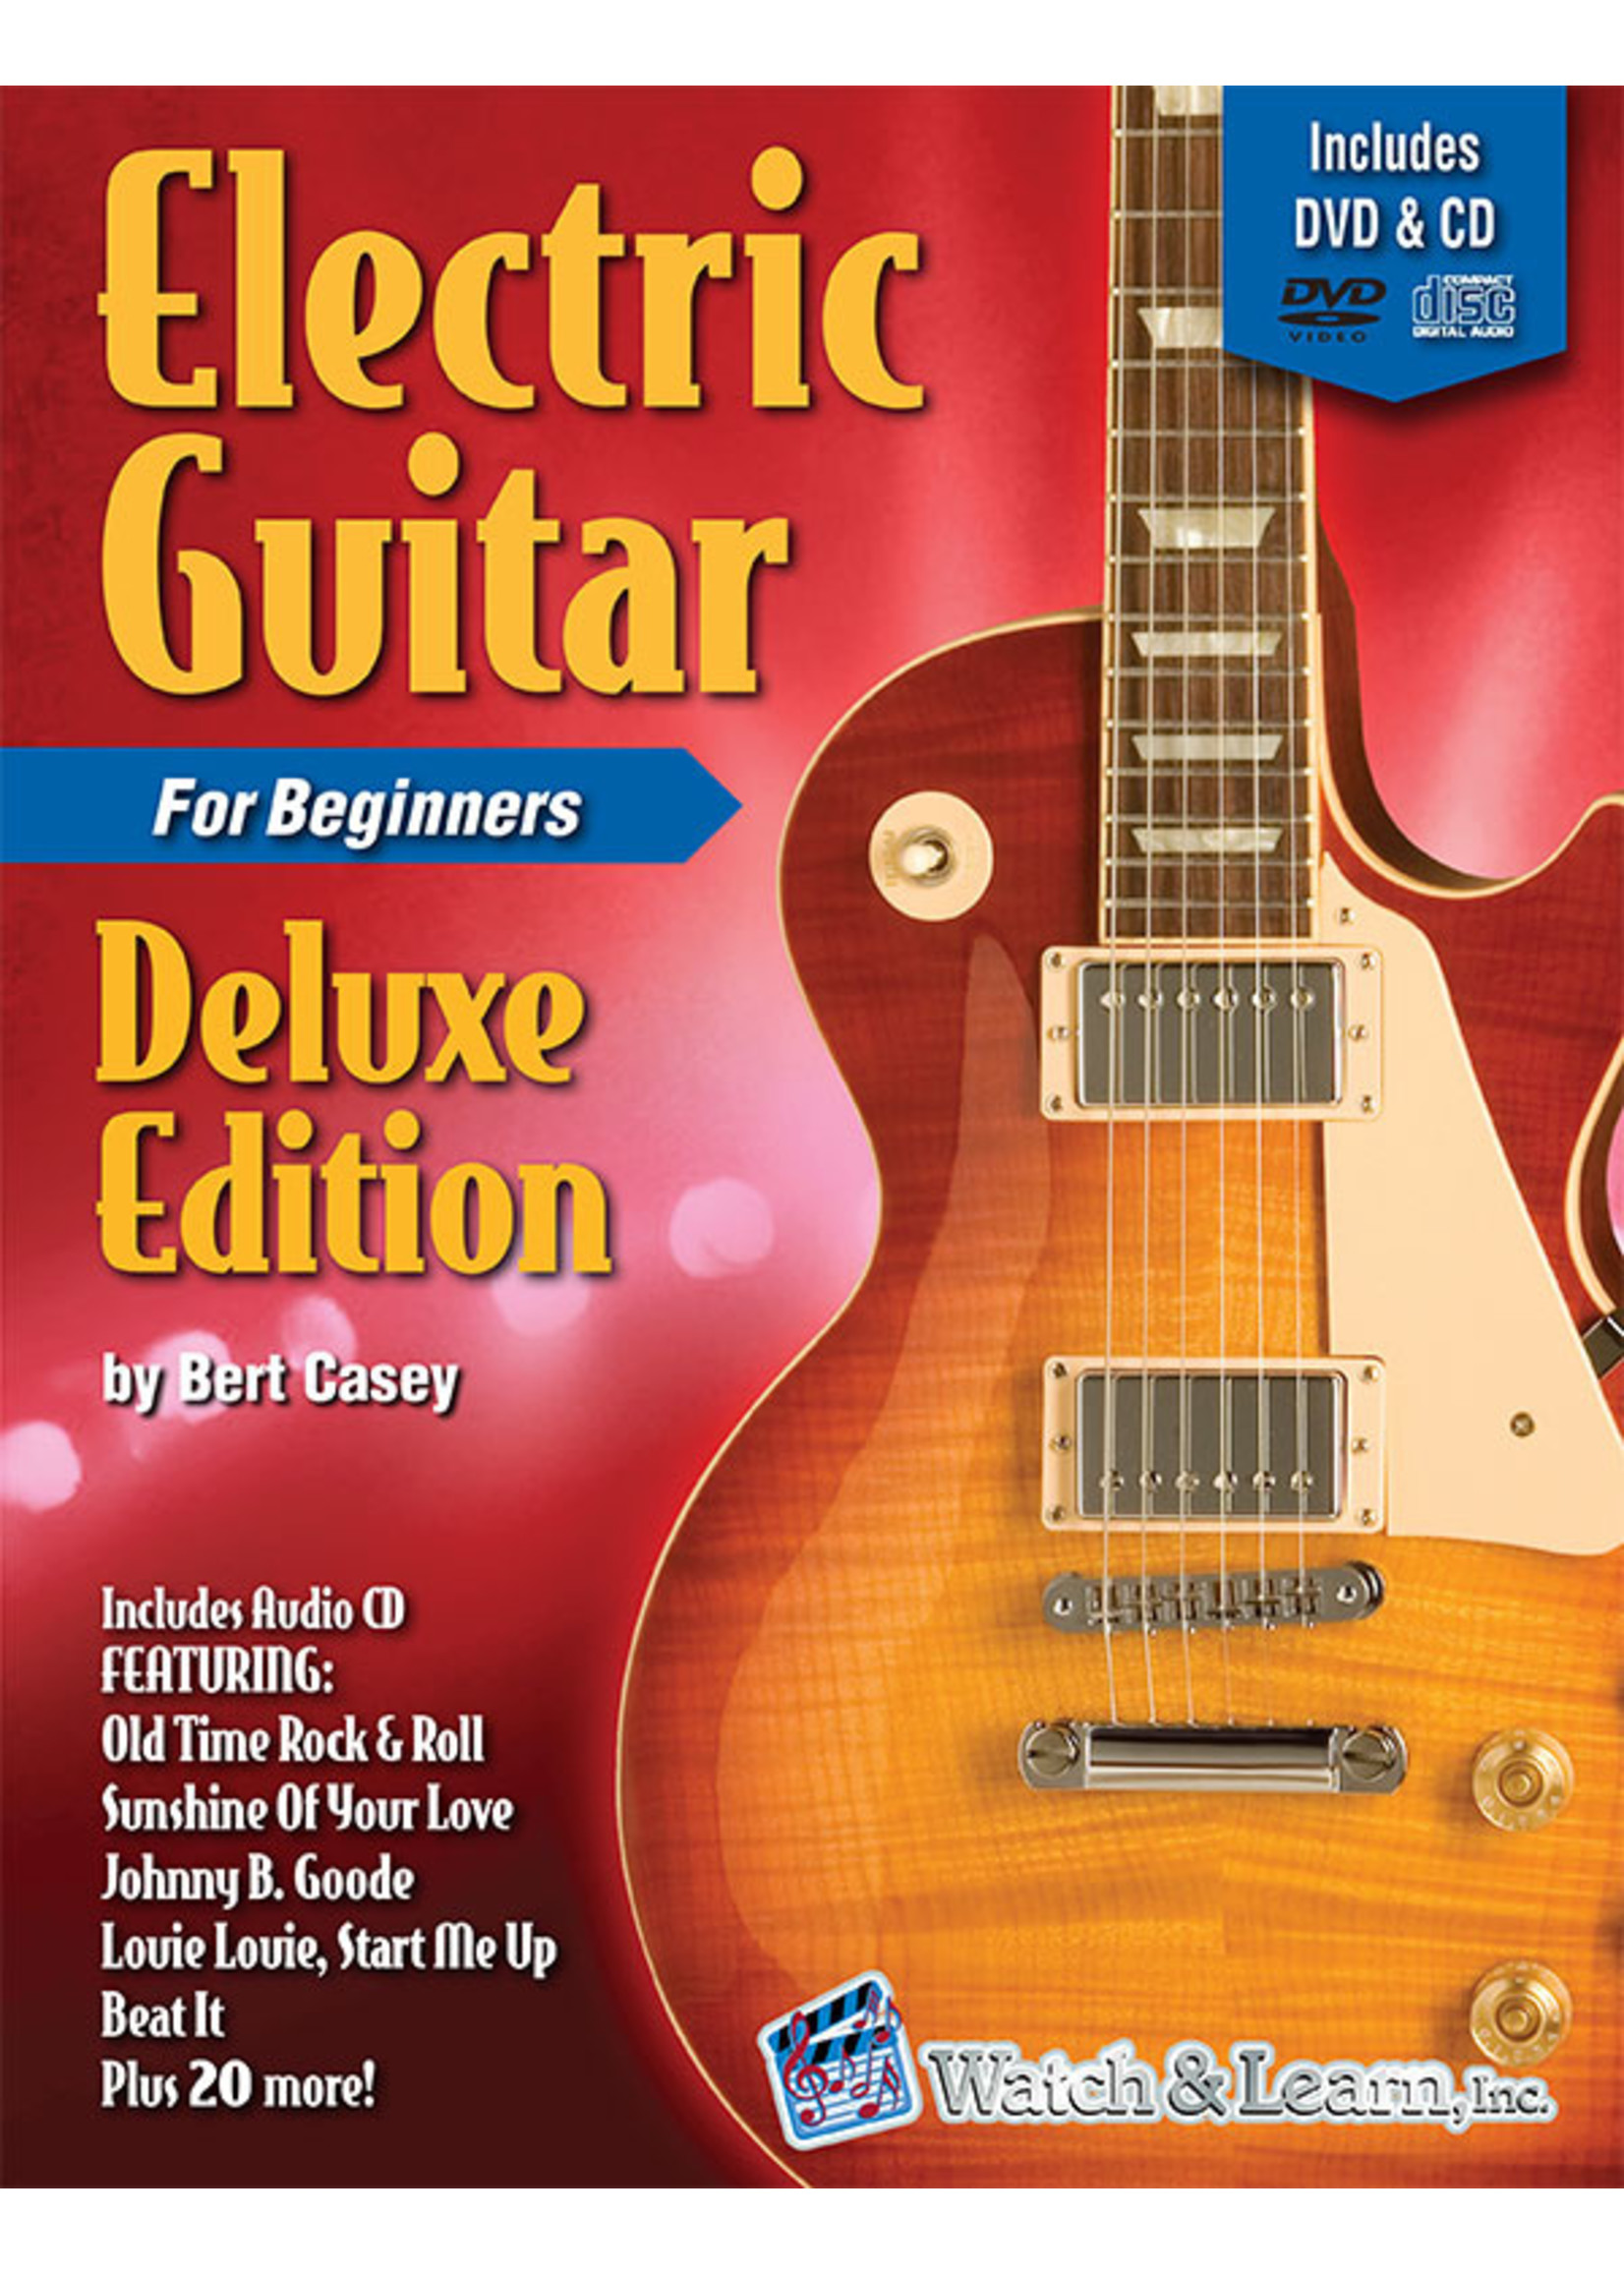 Watch & Learn INC Watch & Learn Electric Guitar Deluxe Edition